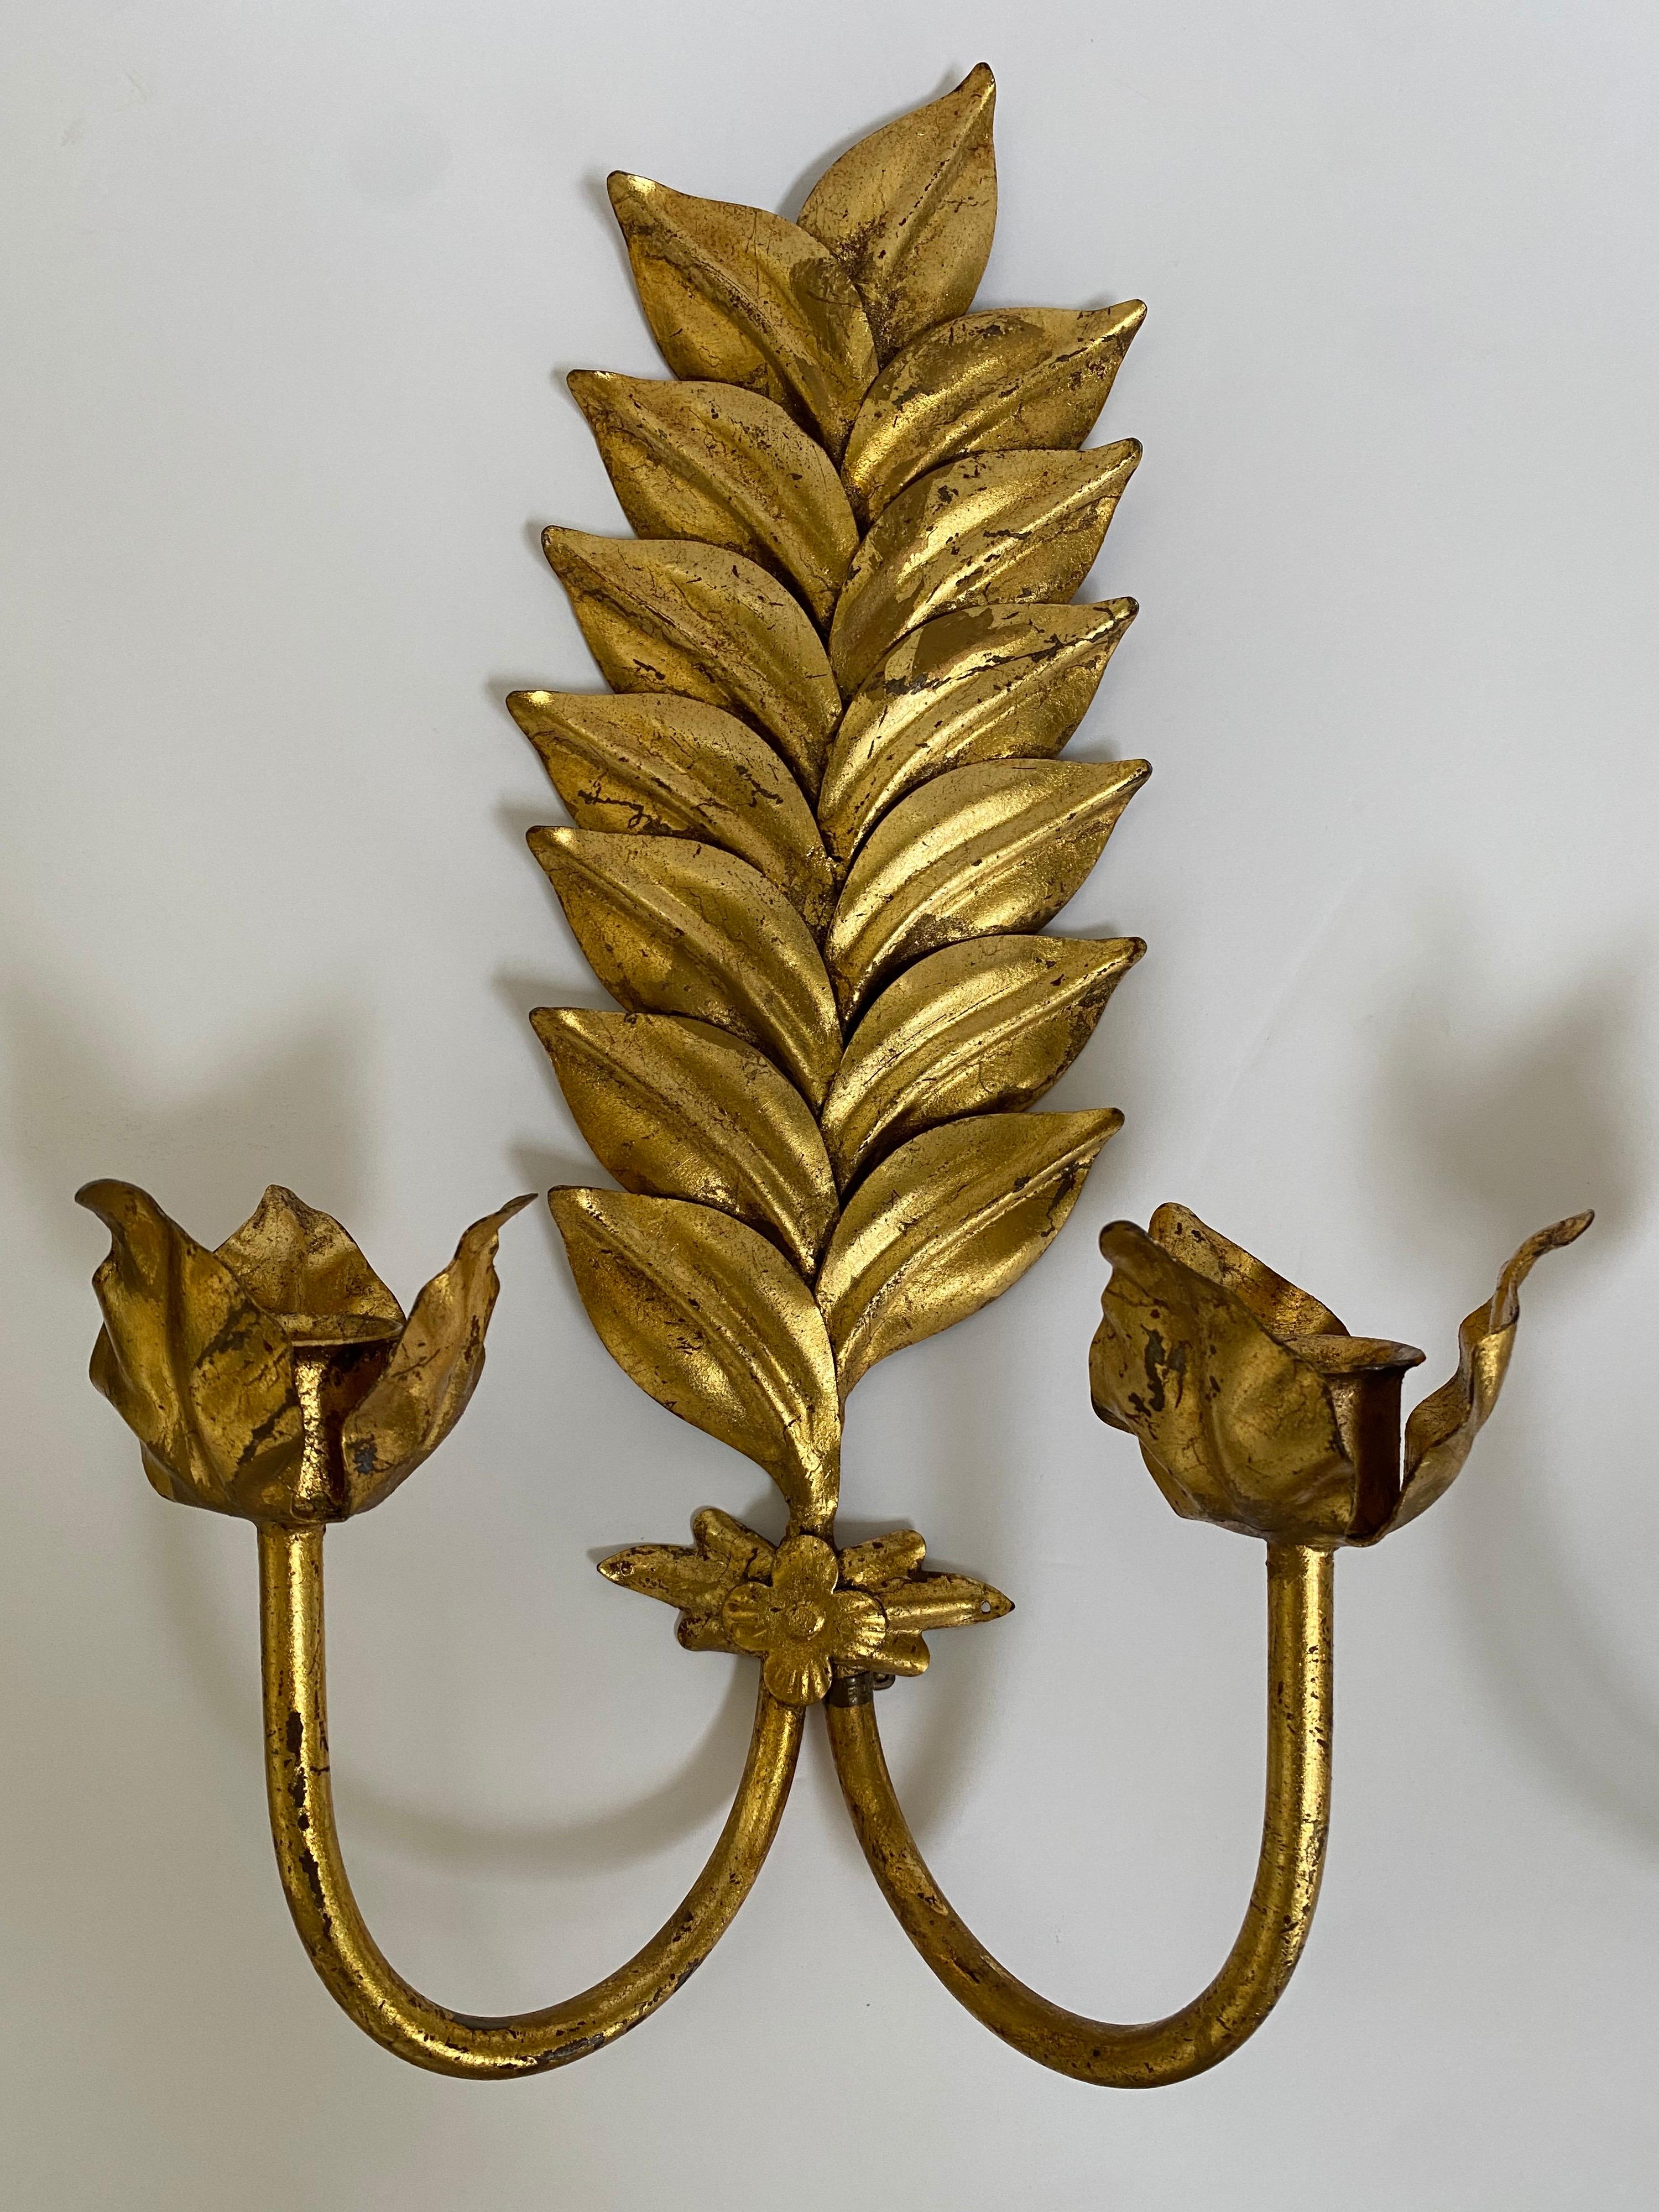 Pair of Hollywood Regency style double arm Laurel leaf motif candle wall sconces. These gold gilt metal botanical foliate sconces hold standard taper candles and retain their original 